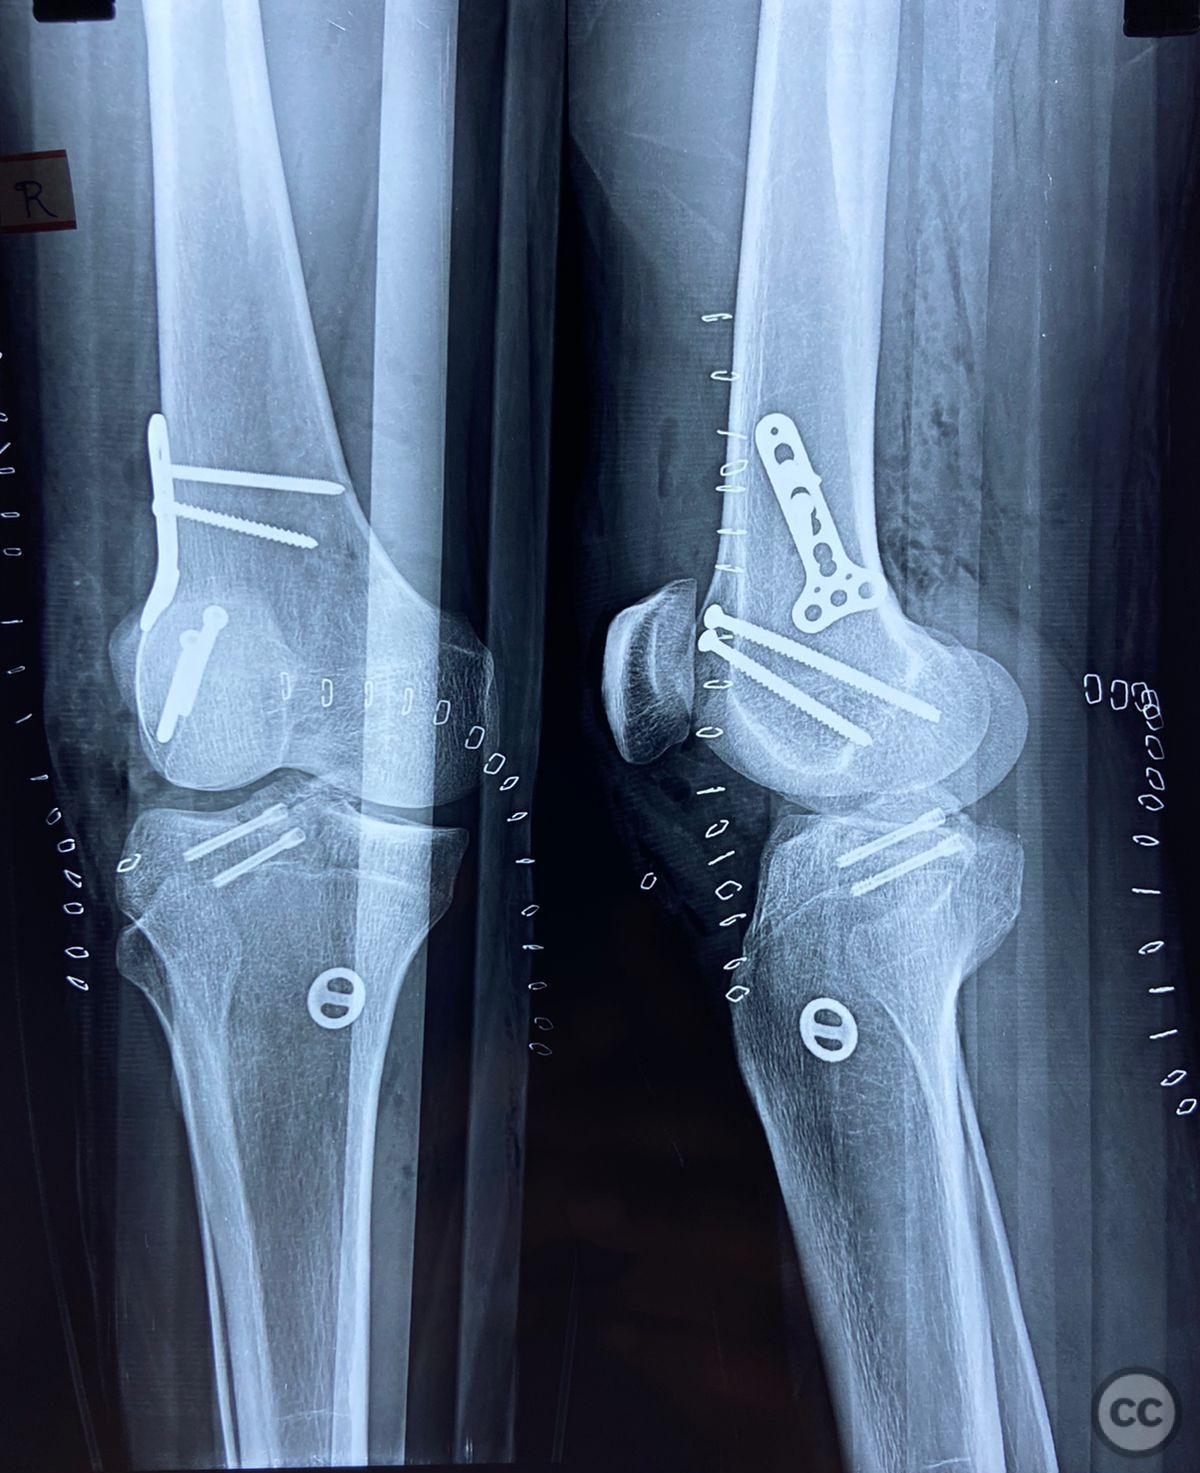 Ipsilateral Lateral Condyle Hoffa S Fracture With PCL Avulsion Fracture And Lateral Tibial